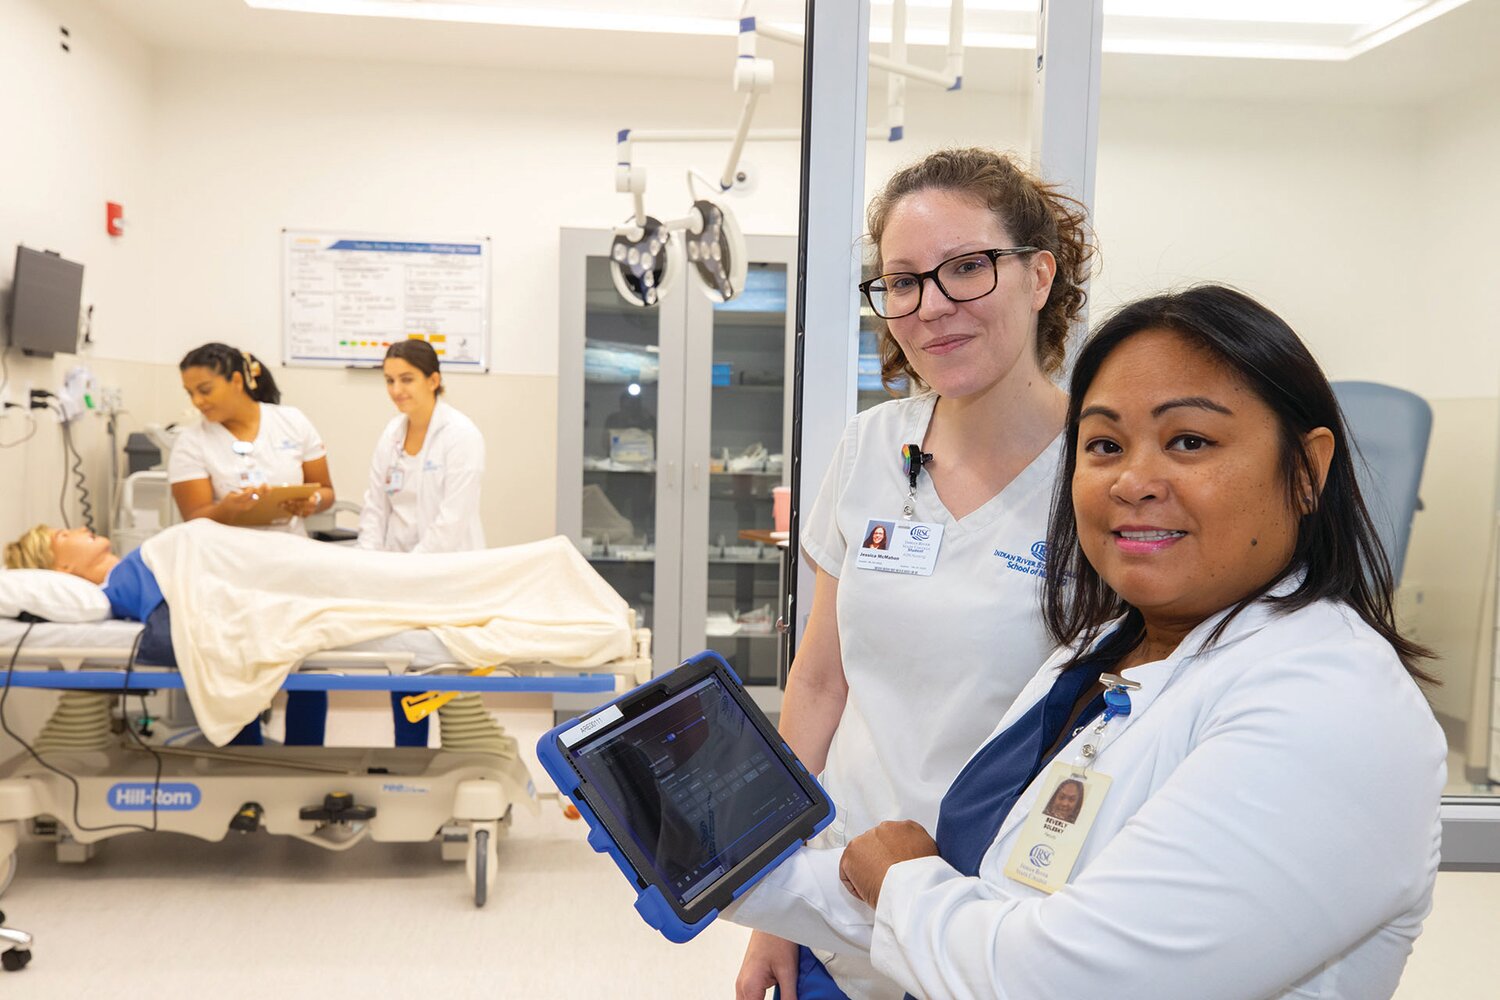 Jessica McMahon, ADN Student (left) and Dr. Beverly Solesky demonstrate the use of a human patient simulator in the high-fidelity simulation center at the IRSC School of Nursing on the Pruitt Campus in Port St. Lucie.